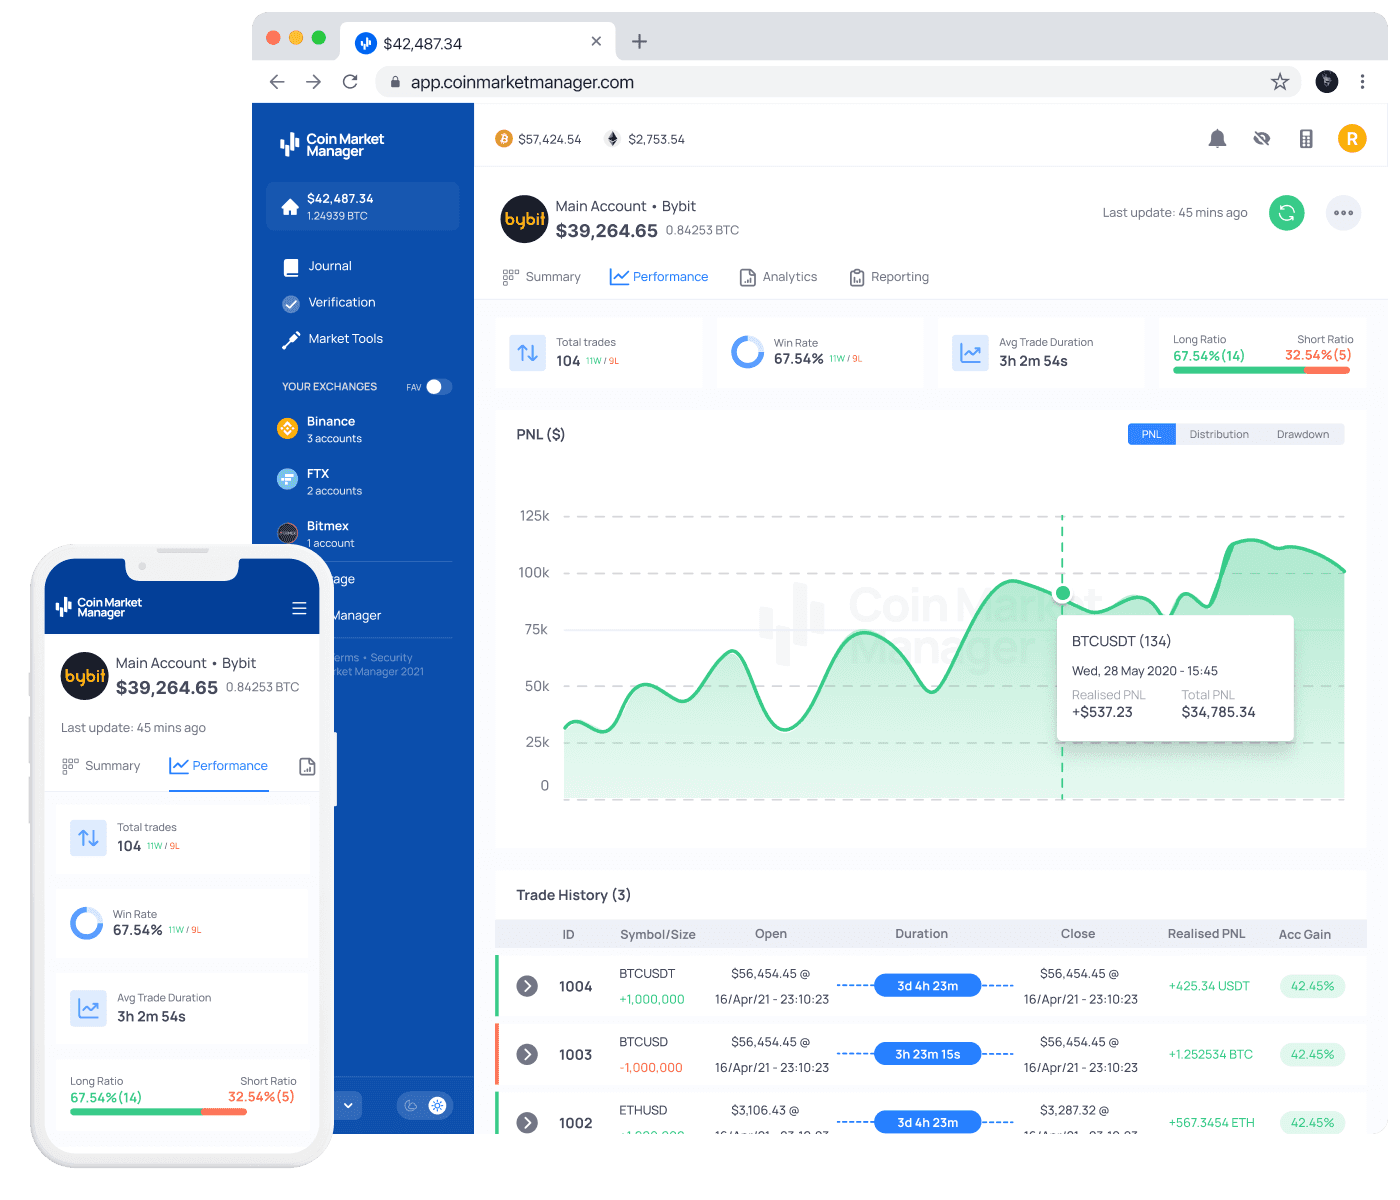 CoinMarketMan - #1 Automated Journaling & Analytics Tool for Crypto Traders